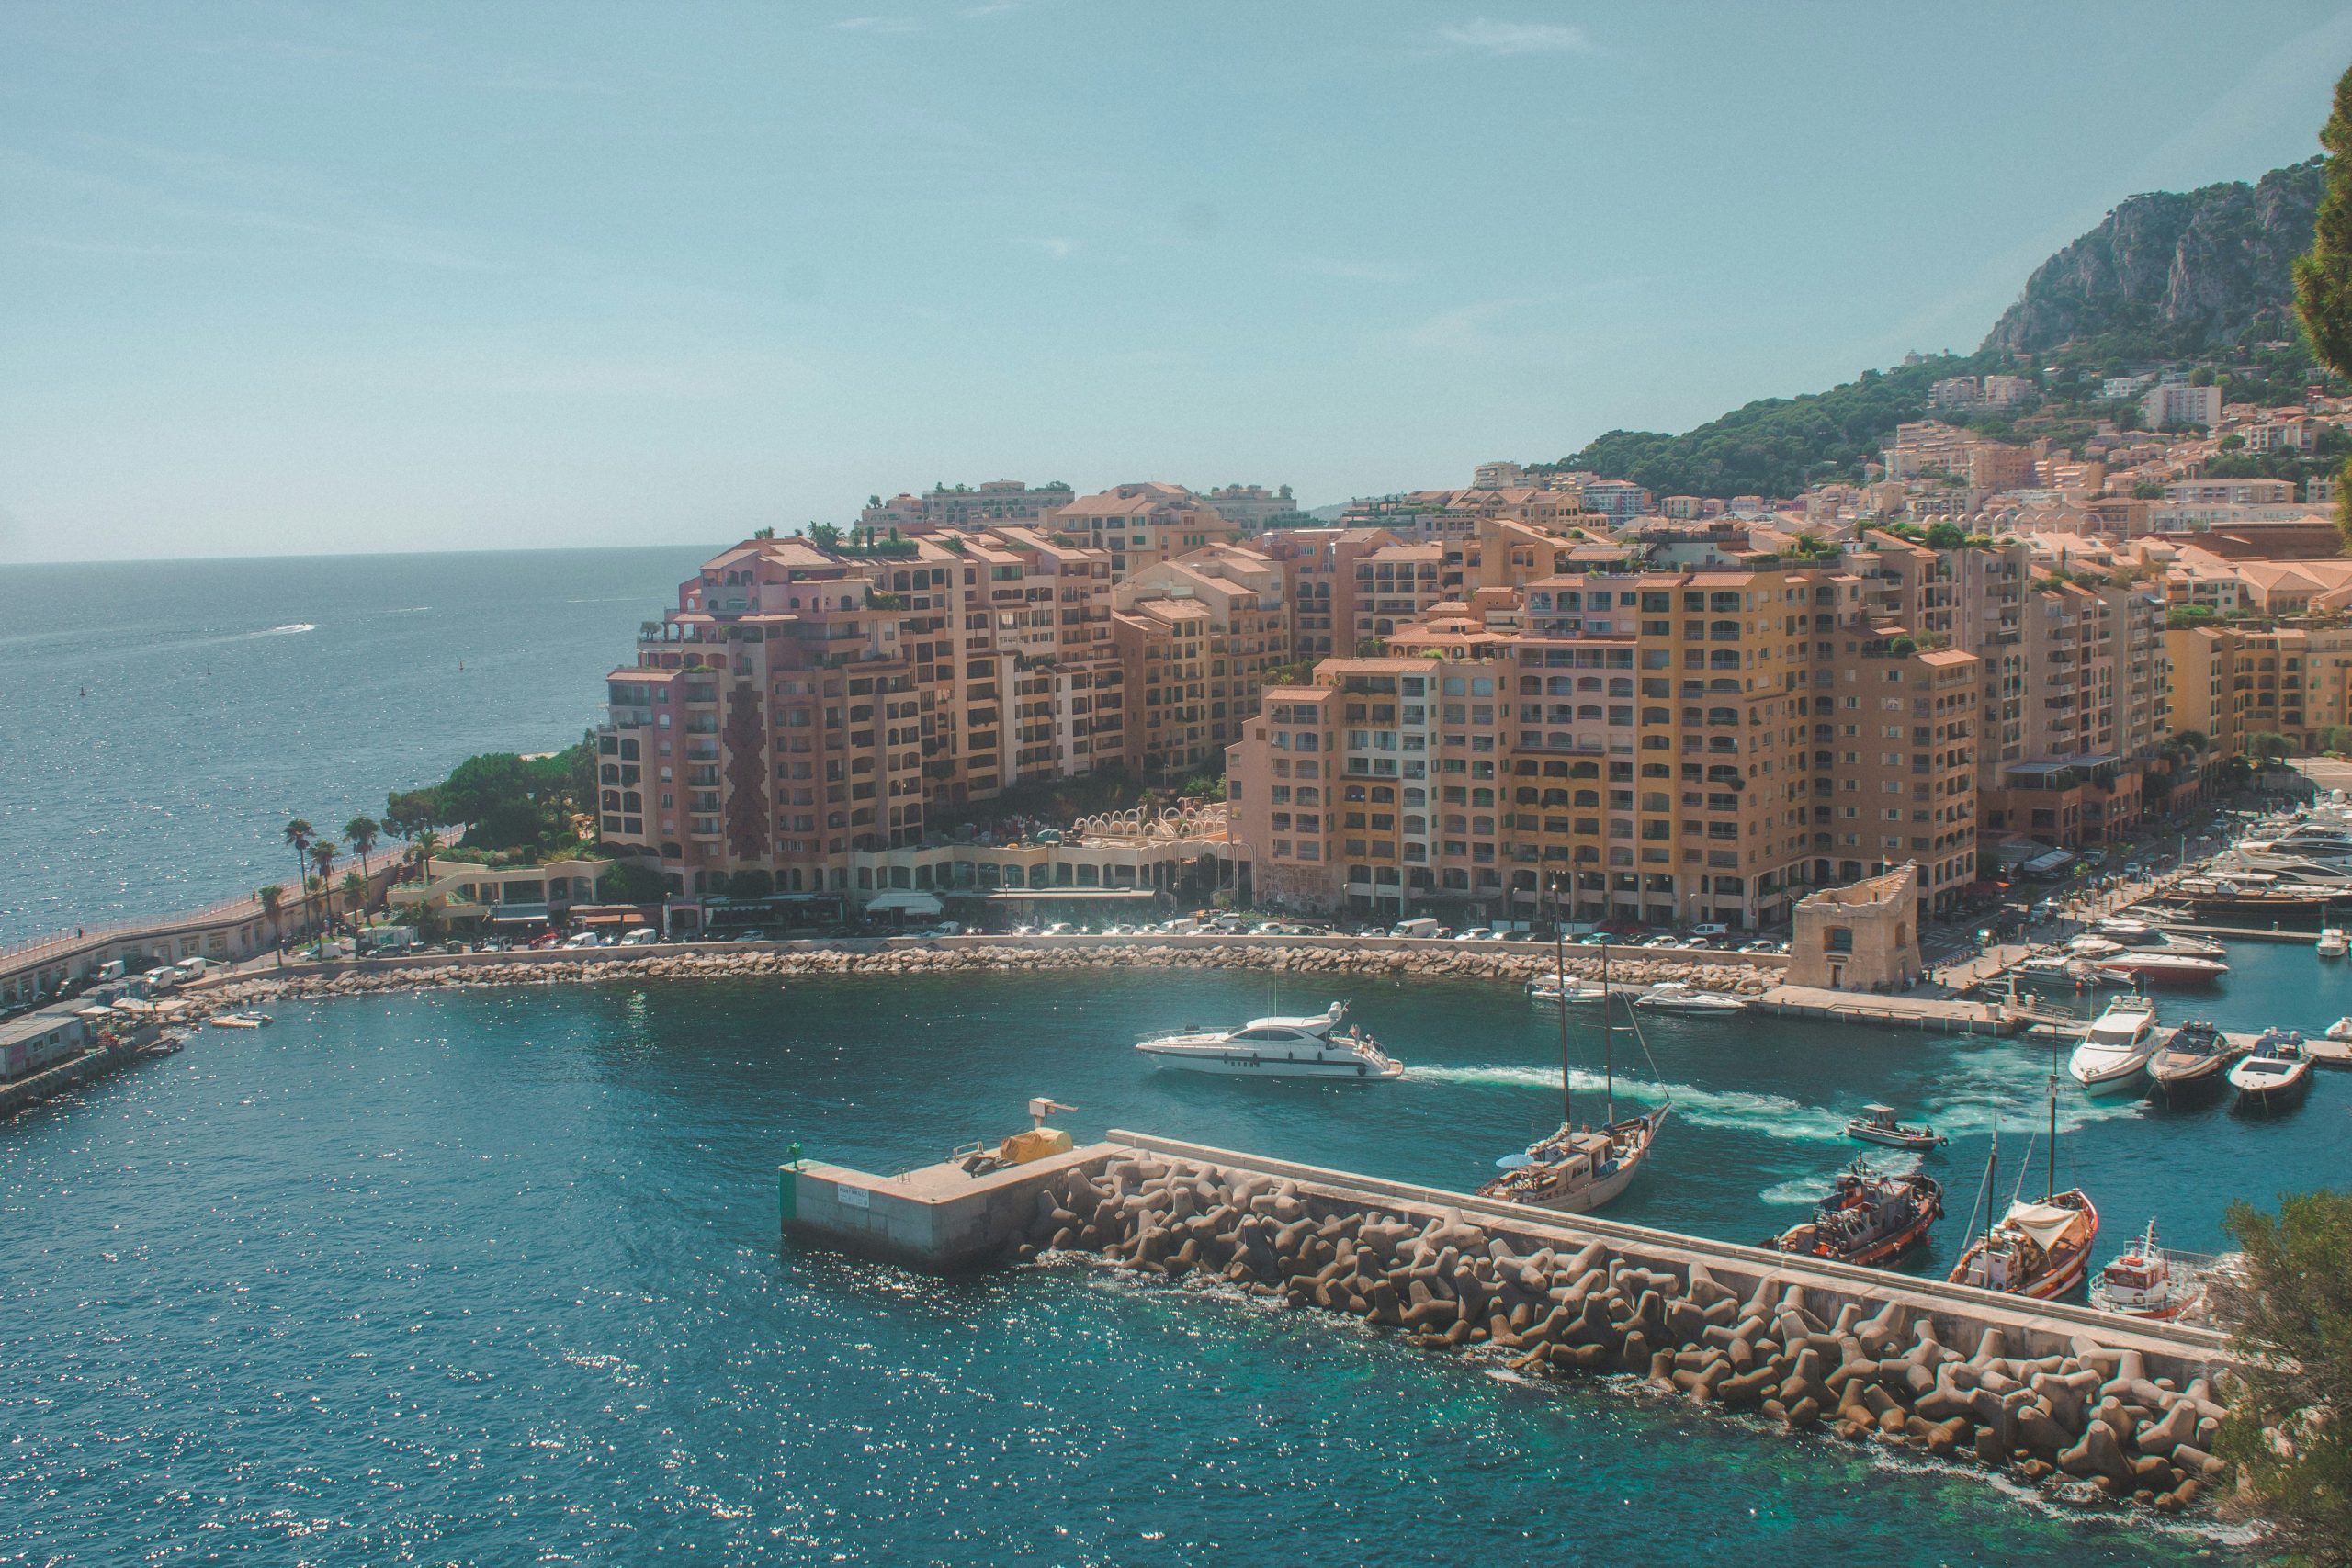 explore monaco, the luxury travel destination nestled on the french riviera. discover glamorous casinos, stunning coastline, and rich culture in this mediterranean paradise.